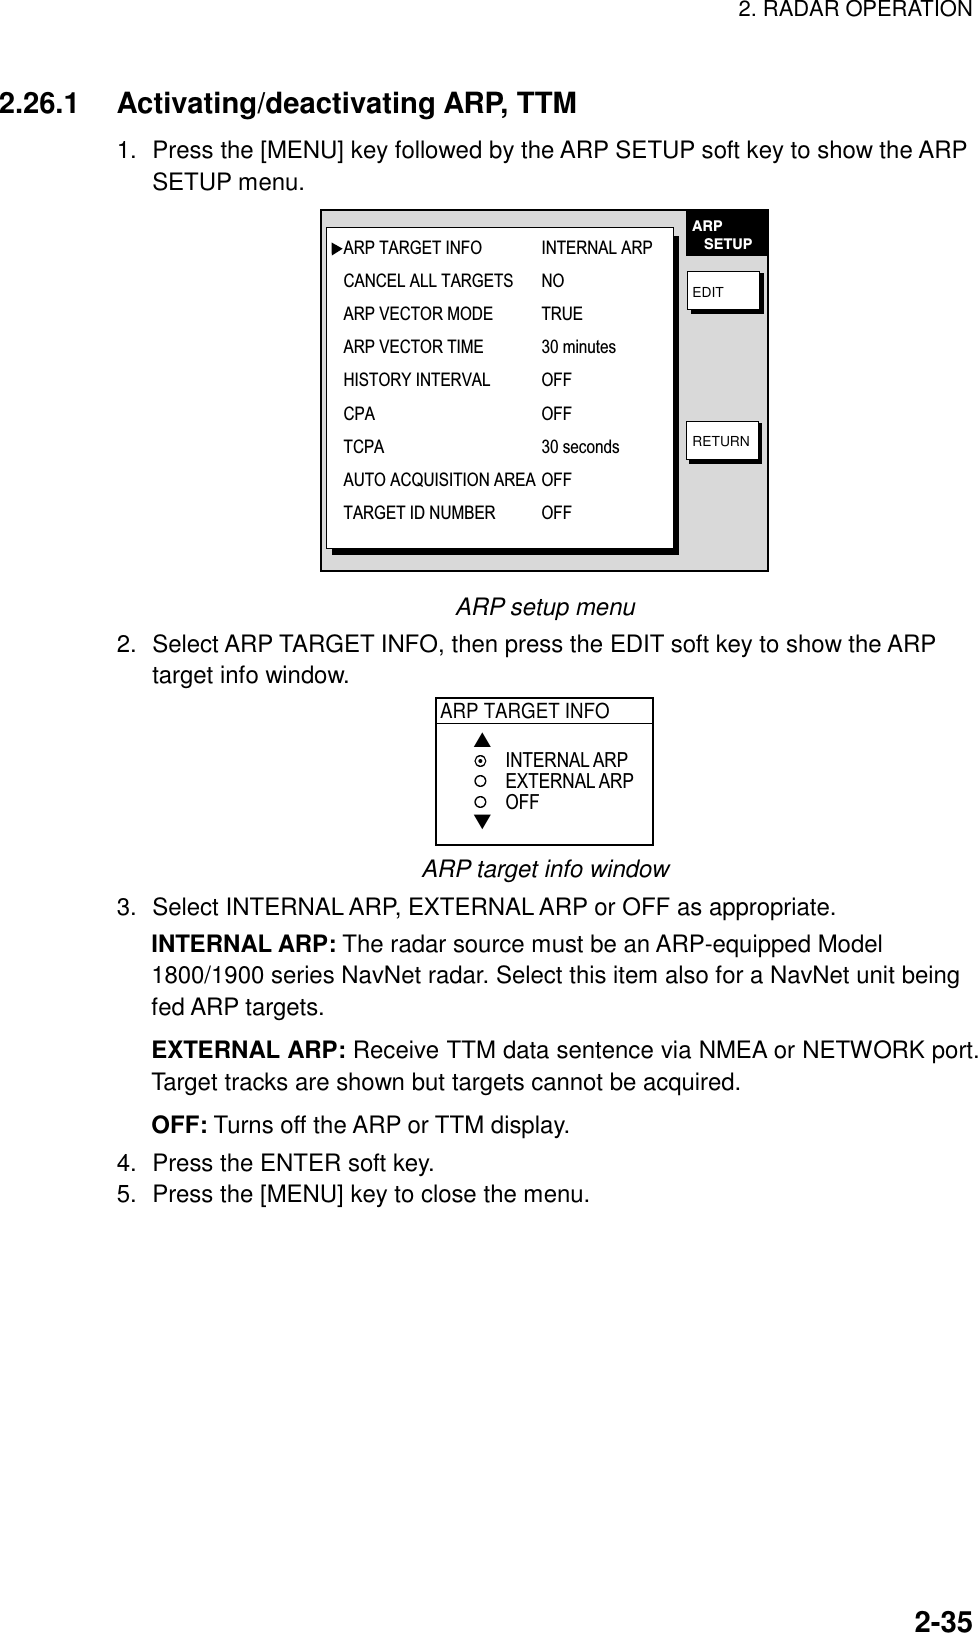 2. RADAR OPERATION    2-352.26.1 Activating/deactivating ARP, TTM 1.  Press the [MENU] key followed by the ARP SETUP soft key to show the ARP SETUP menu. EDITRETURNARP   SETUPARP TARGET INFO INTERNAL ARPCANCEL ALL TARGETS NOARP VECTOR MODE TRUEARP VECTOR TIME 30 minutesHISTORY INTERVAL OFFCPA OFFTCPA 30 secondsAUTO ACQUISITION AREA OFFTARGET ID NUMBER  OFF ARP setup menu 2.  Select ARP TARGET INFO, then press the EDIT soft key to show the ARP target info window. ARP TARGET INFO▲▼INTERNAL ARPEXTERNAL ARPOFF ARP target info window 3.  Select INTERNAL ARP, EXTERNAL ARP or OFF as appropriate. INTERNAL ARP: The radar source must be an ARP-equipped Model 1800/1900 series NavNet radar. Select this item also for a NavNet unit being fed ARP targets. EXTERNAL ARP: Receive TTM data sentence via NMEA or NETWORK port. Target tracks are shown but targets cannot be acquired. OFF: Turns off the ARP or TTM display. 4.  Press the ENTER soft key. 5.  Press the [MENU] key to close the menu.  